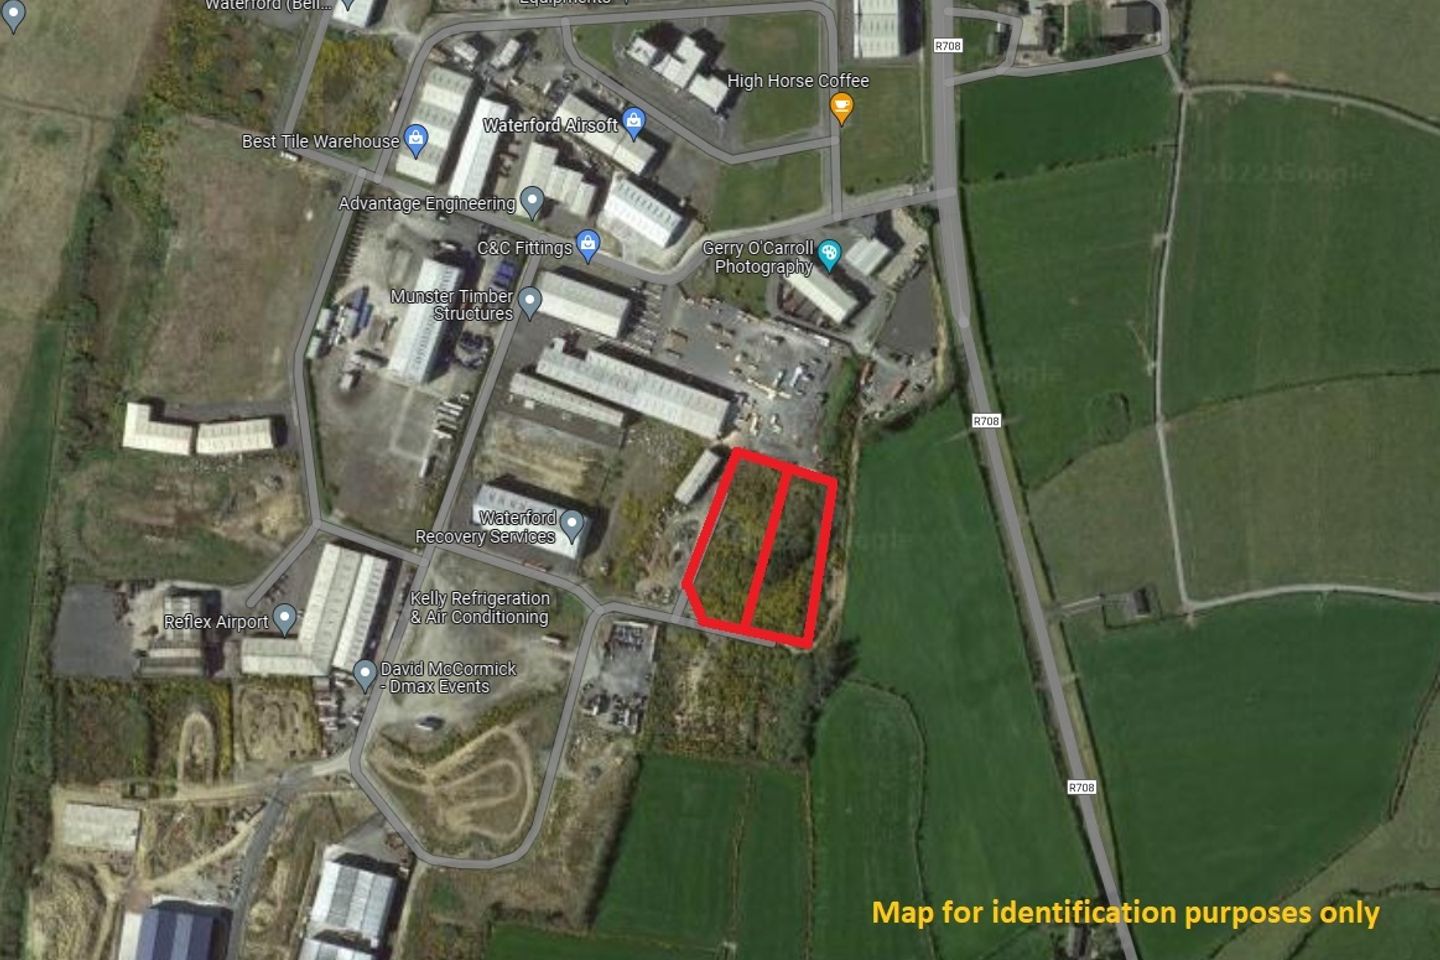 Sites 54 & 54c Waterford Airport Business Park, Waterford City, Co. Waterford